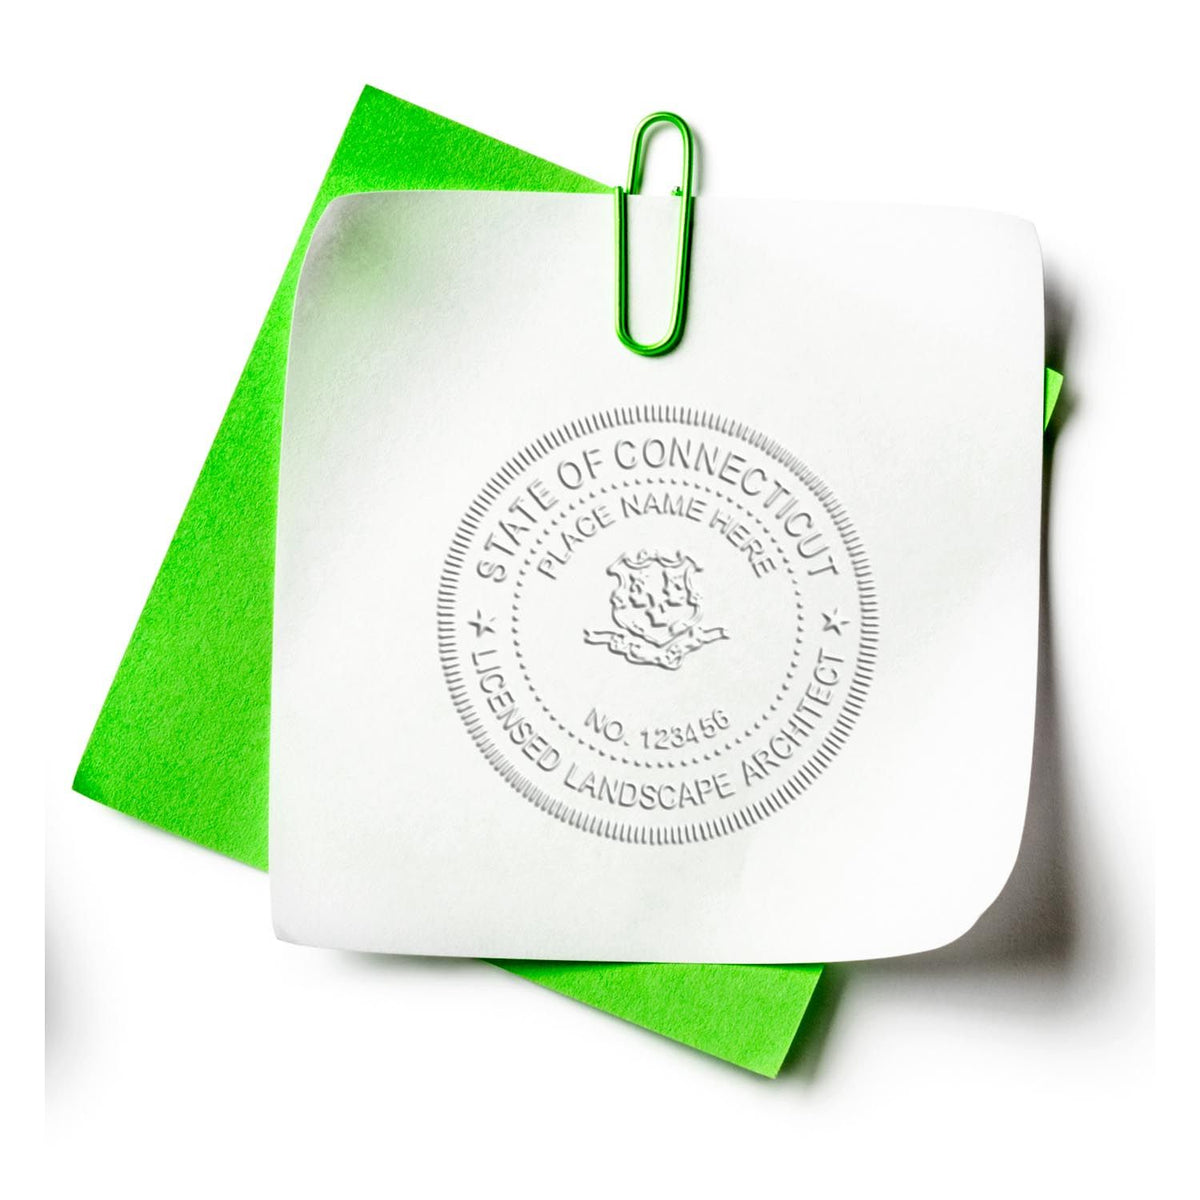 An alternative view of the Hybrid Connecticut Landscape Architect Seal stamped on a sheet of paper showing the image in use